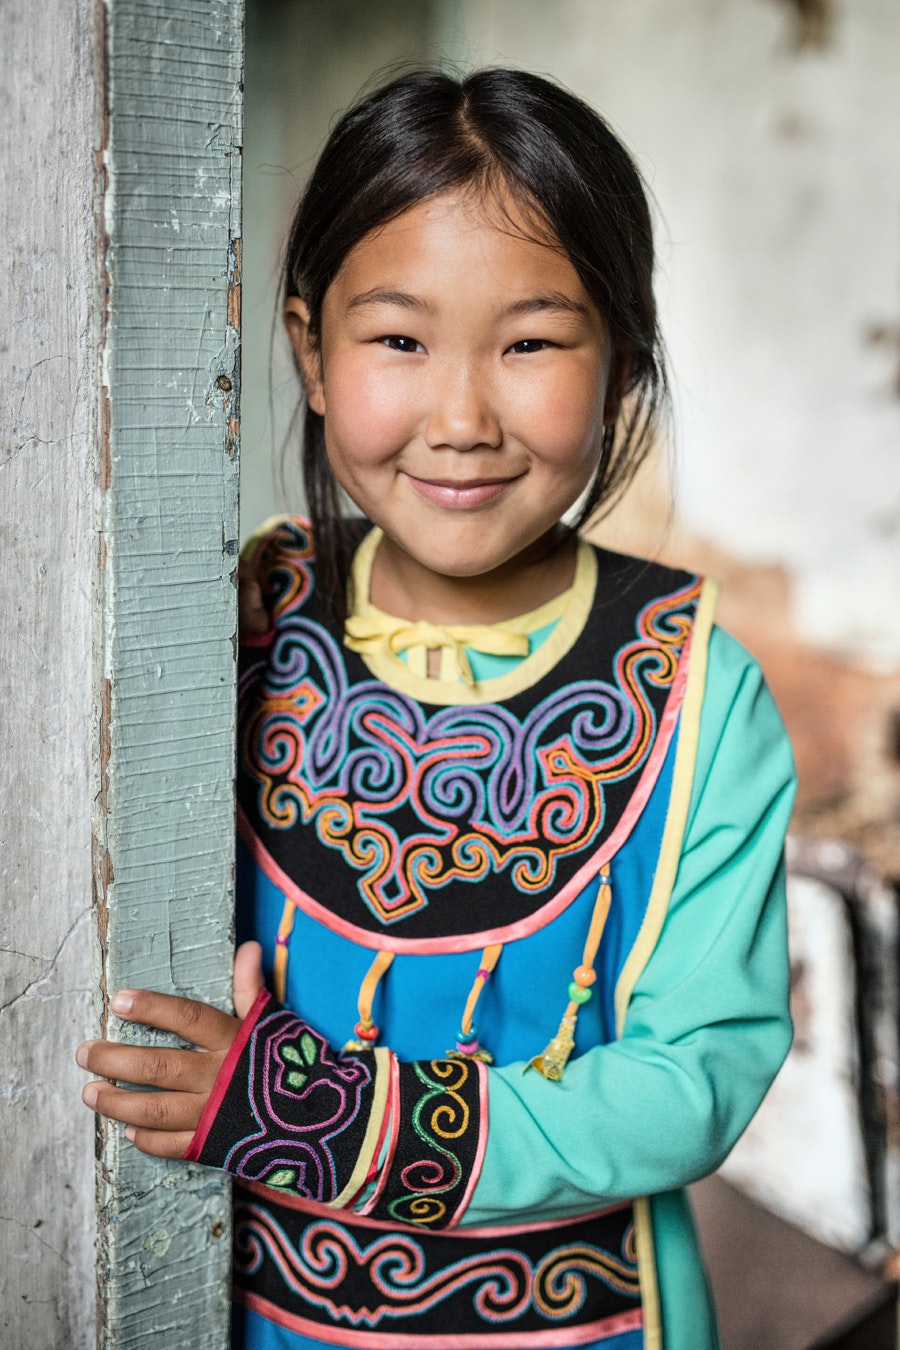 A little girl from the Oroki tribe